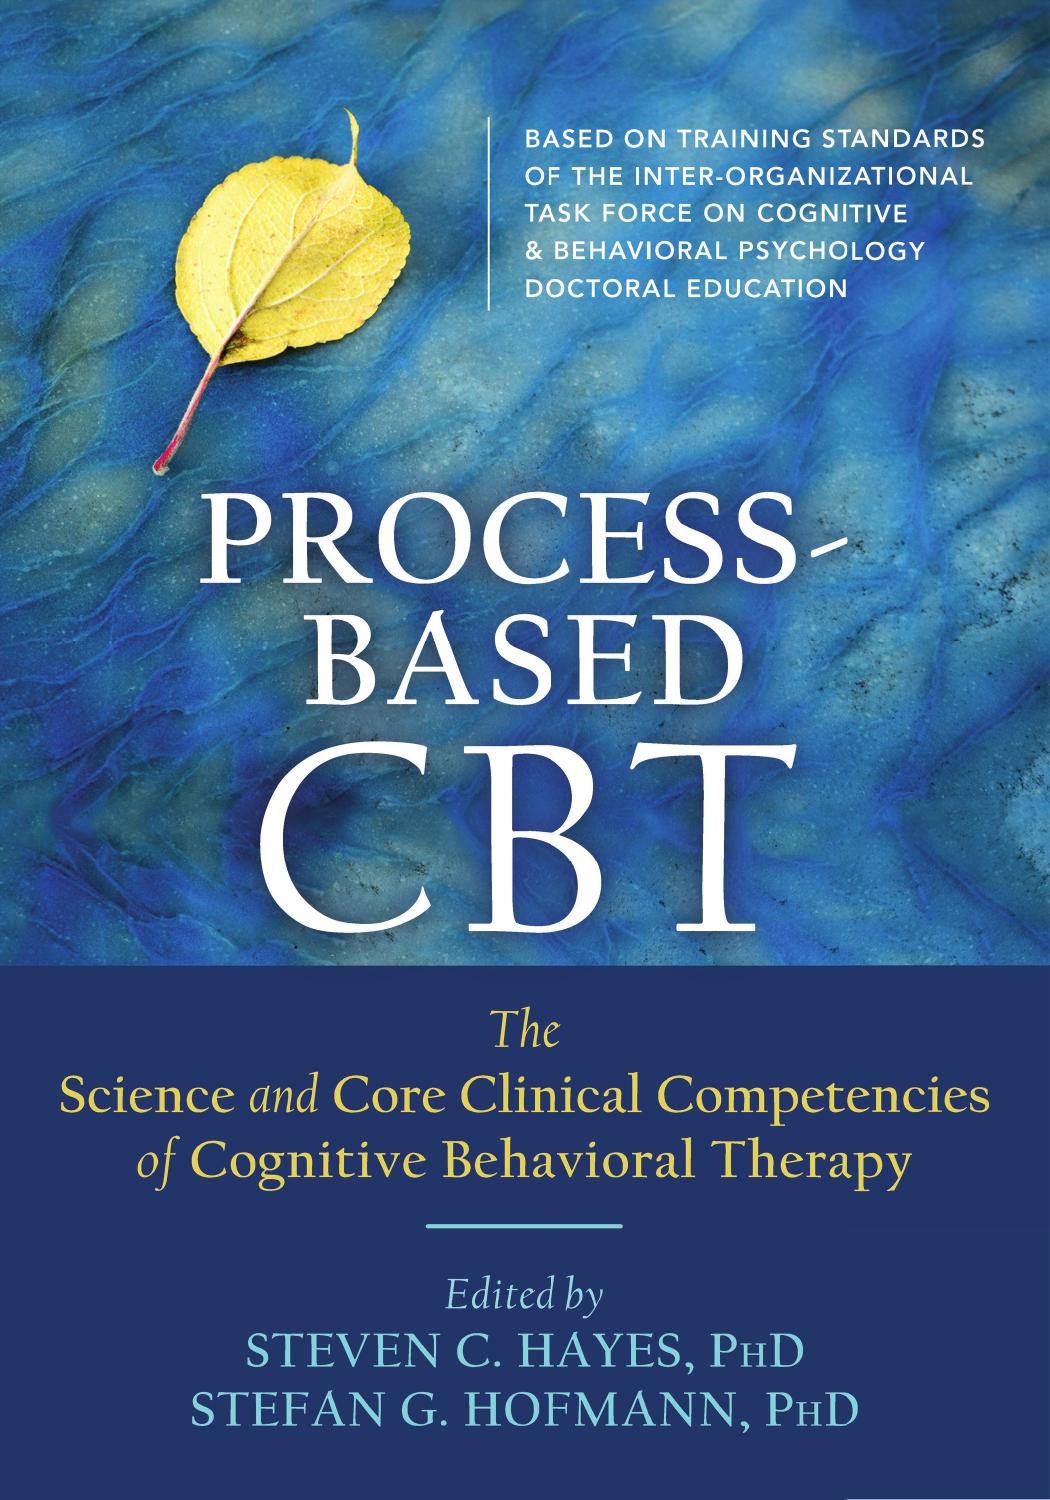 Process-Based CBT  The Science and Core Clinical Competencies of Cognitive Behavioral Therapy 2018